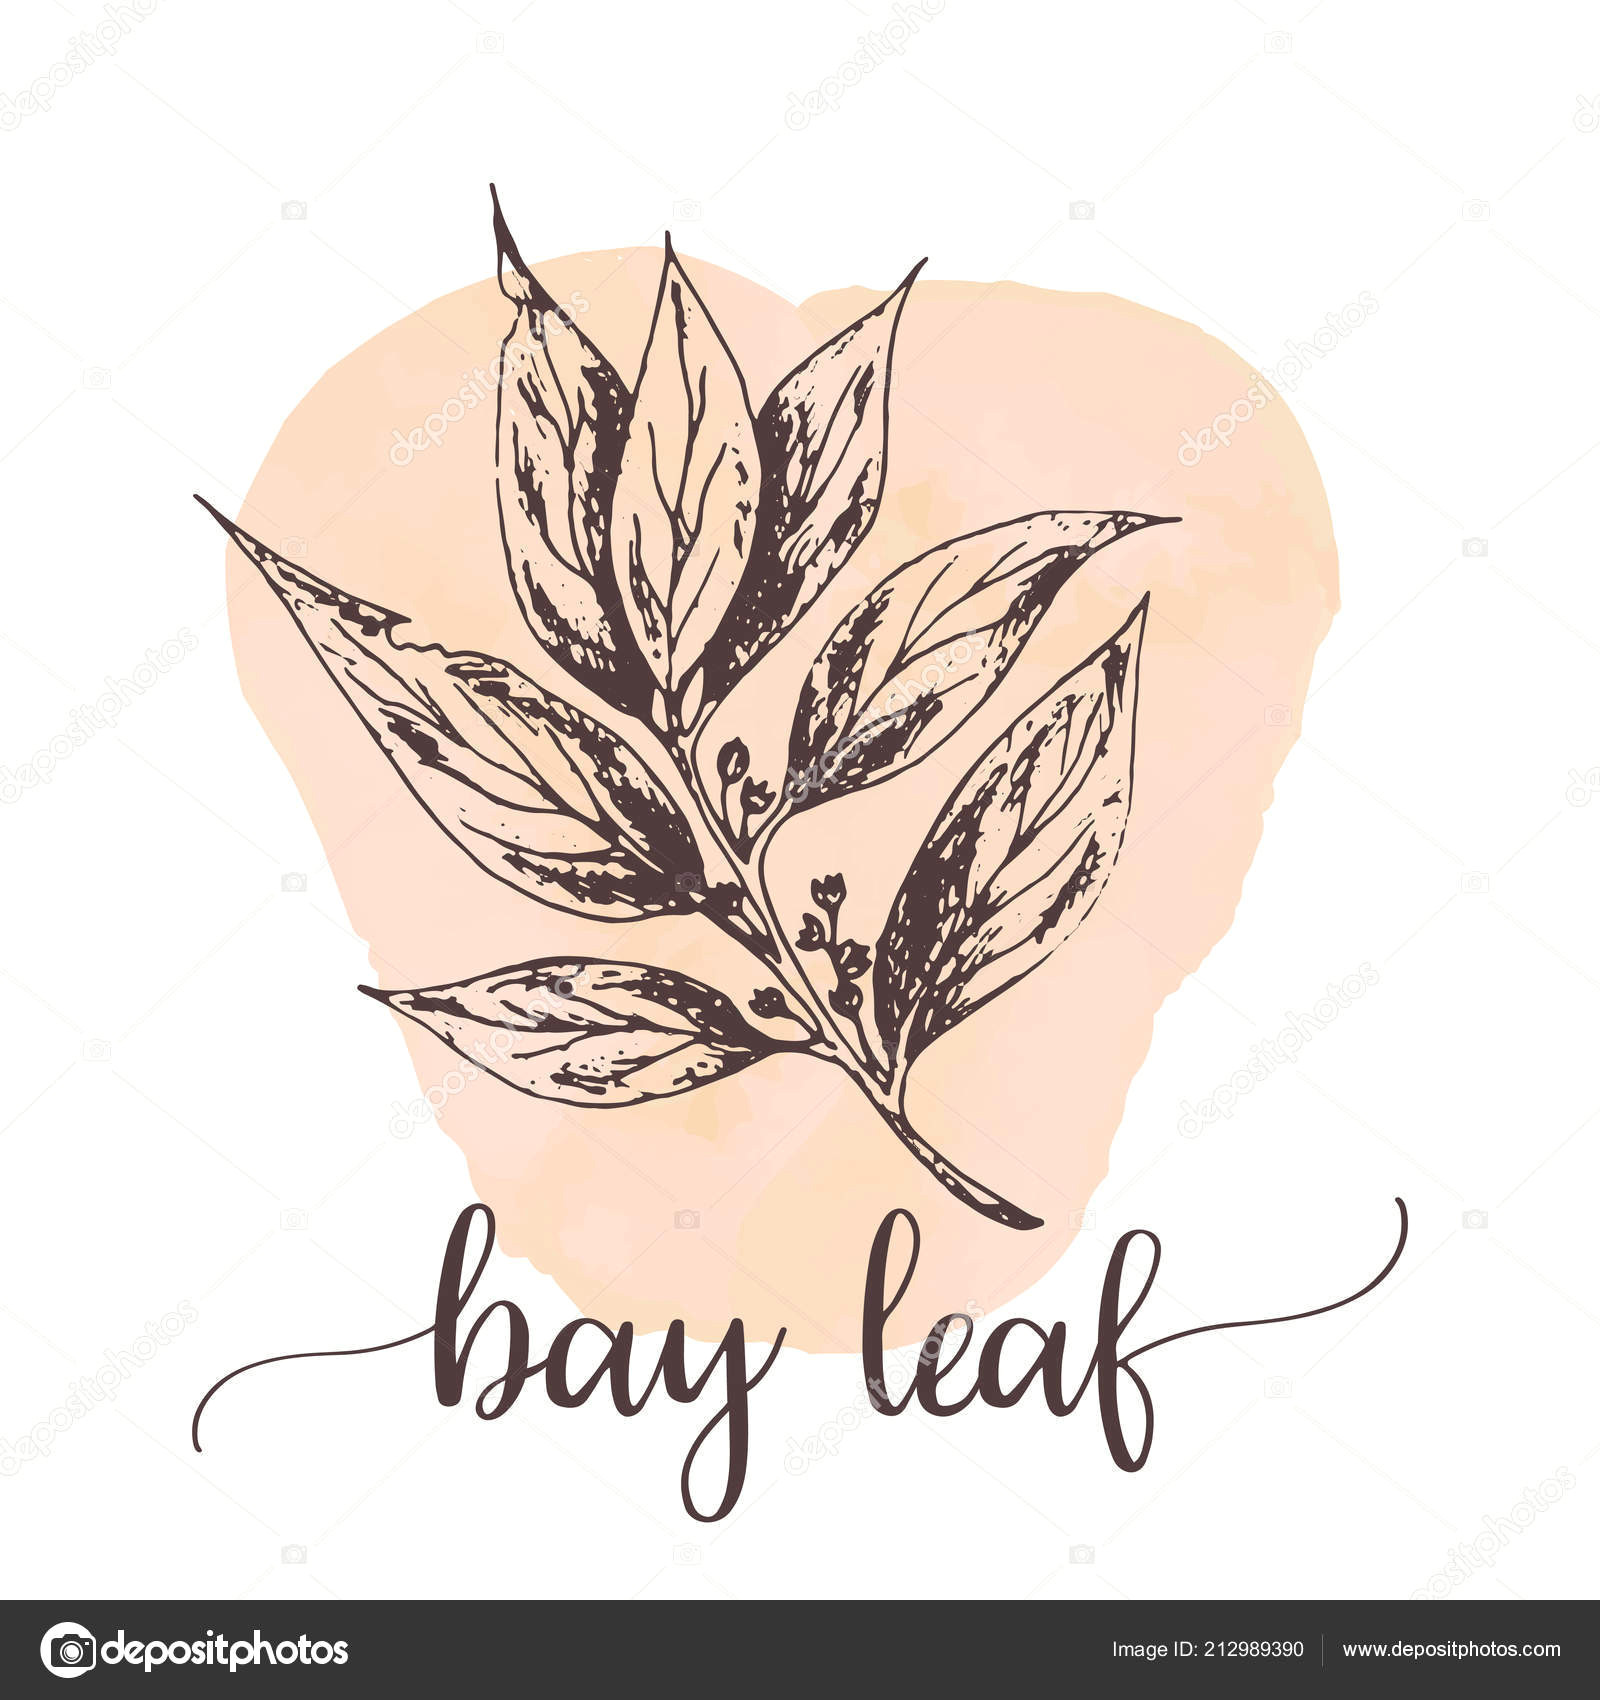 Drawing Hands Proko Bay Leaf Hand Drawn Ink Illustration Vector Design for Tags Cards